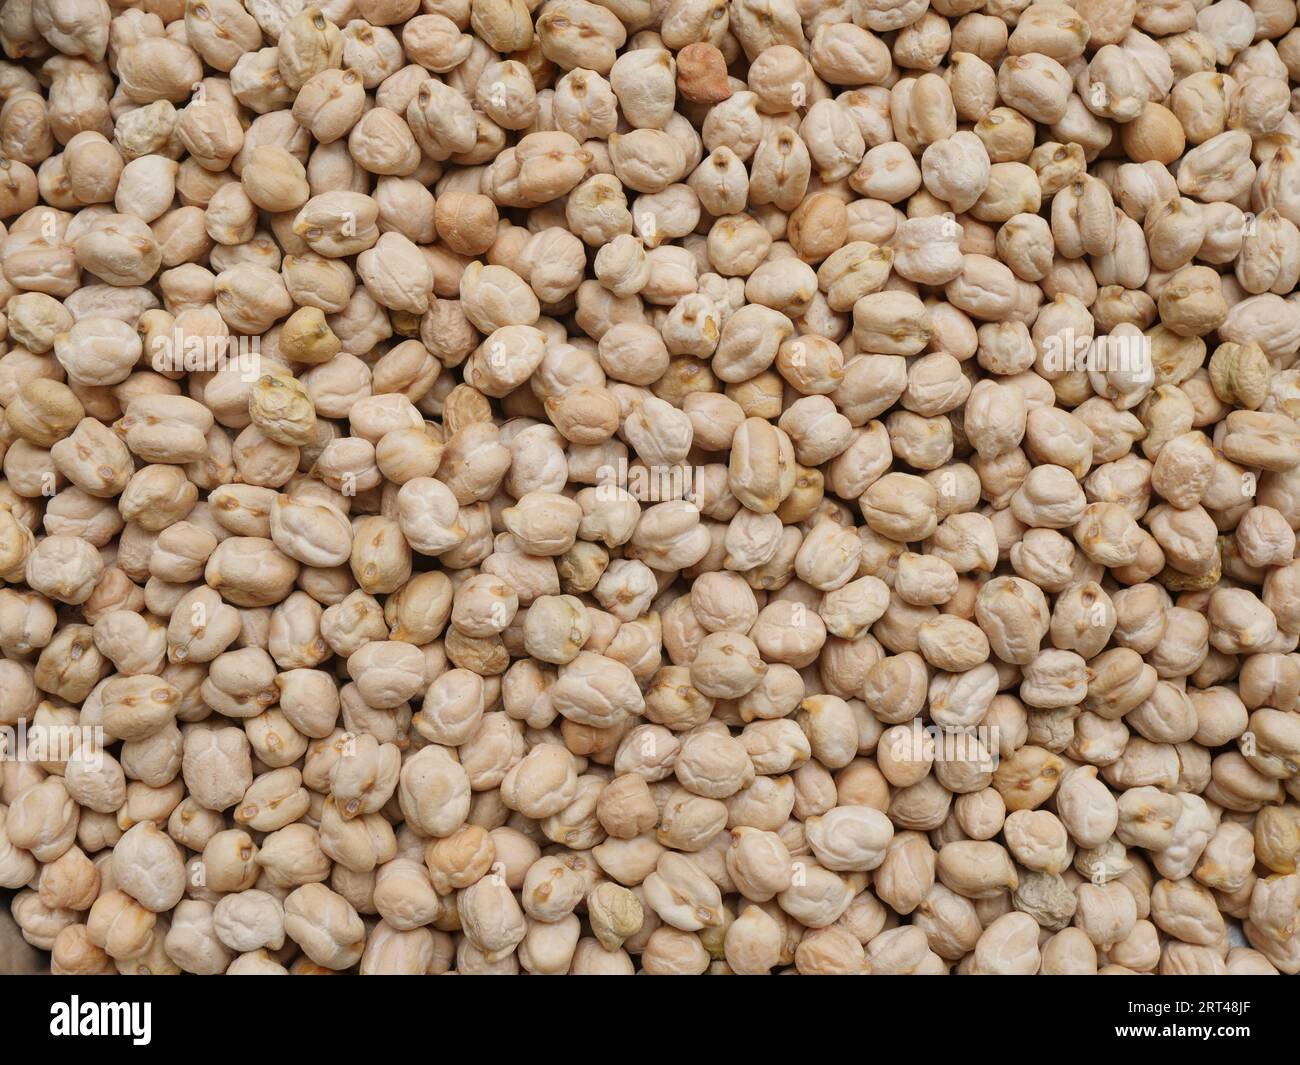 Chickpea in market for sale,close up shot Stock Photo